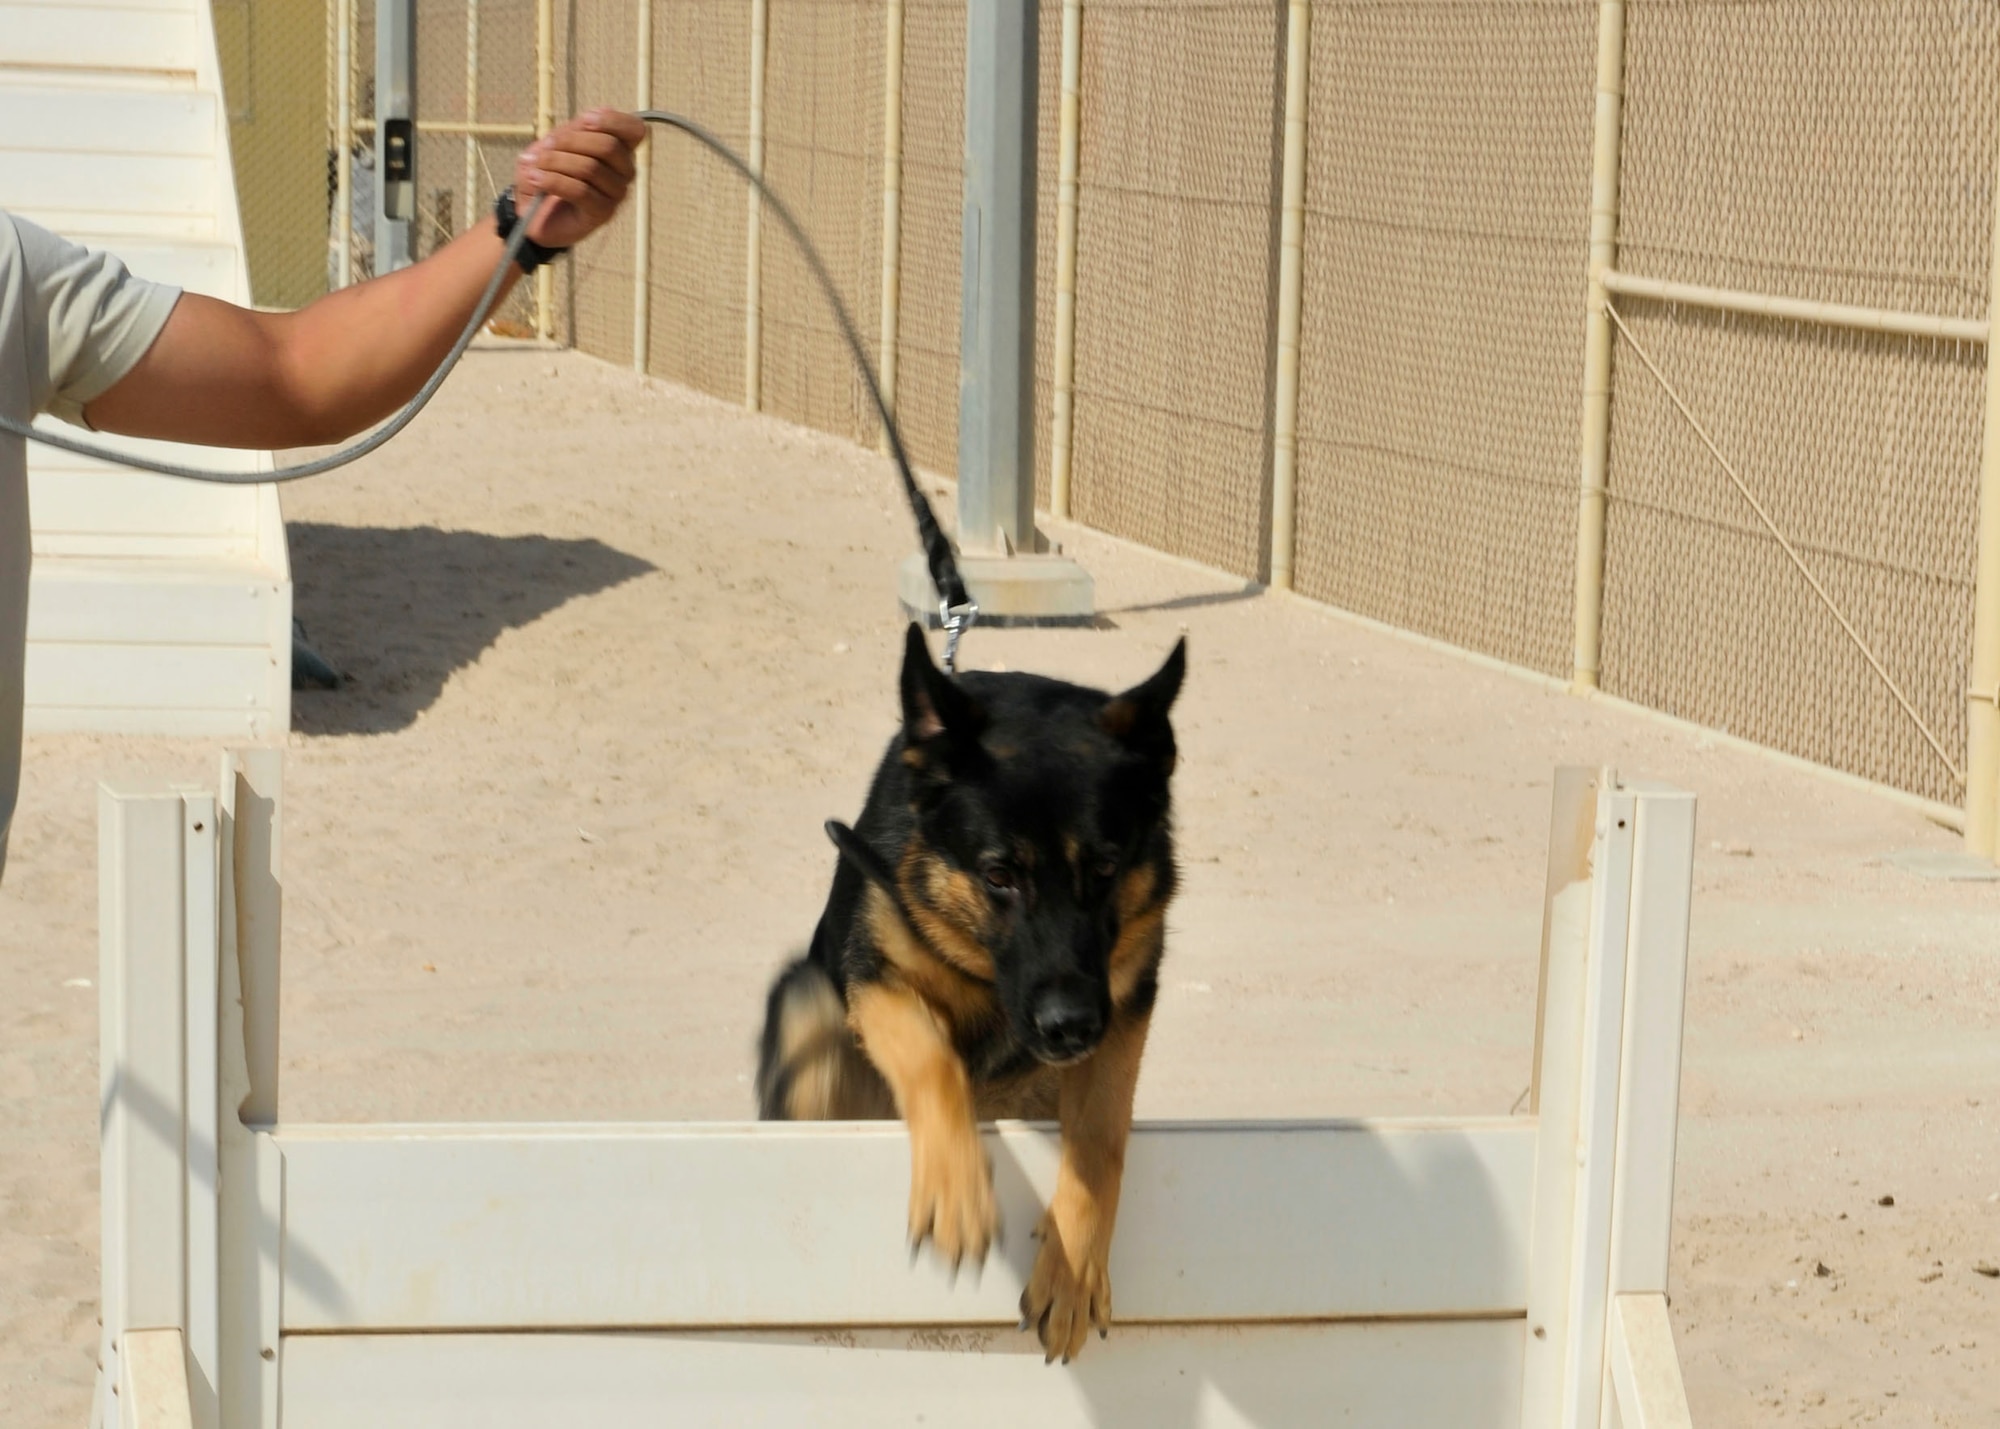 Renato a 3-year-old military working dog with the 379th Expeditionary Security Forces Squadron, jumps over an obstacle during training at Al Udeid Air Base, Qatar, Sept. 24, 2014. Military working dogs serve as a psychological deterrent and are trained to attack on command. (U.S. Air Force photo by Senior Airman Colin Cates)